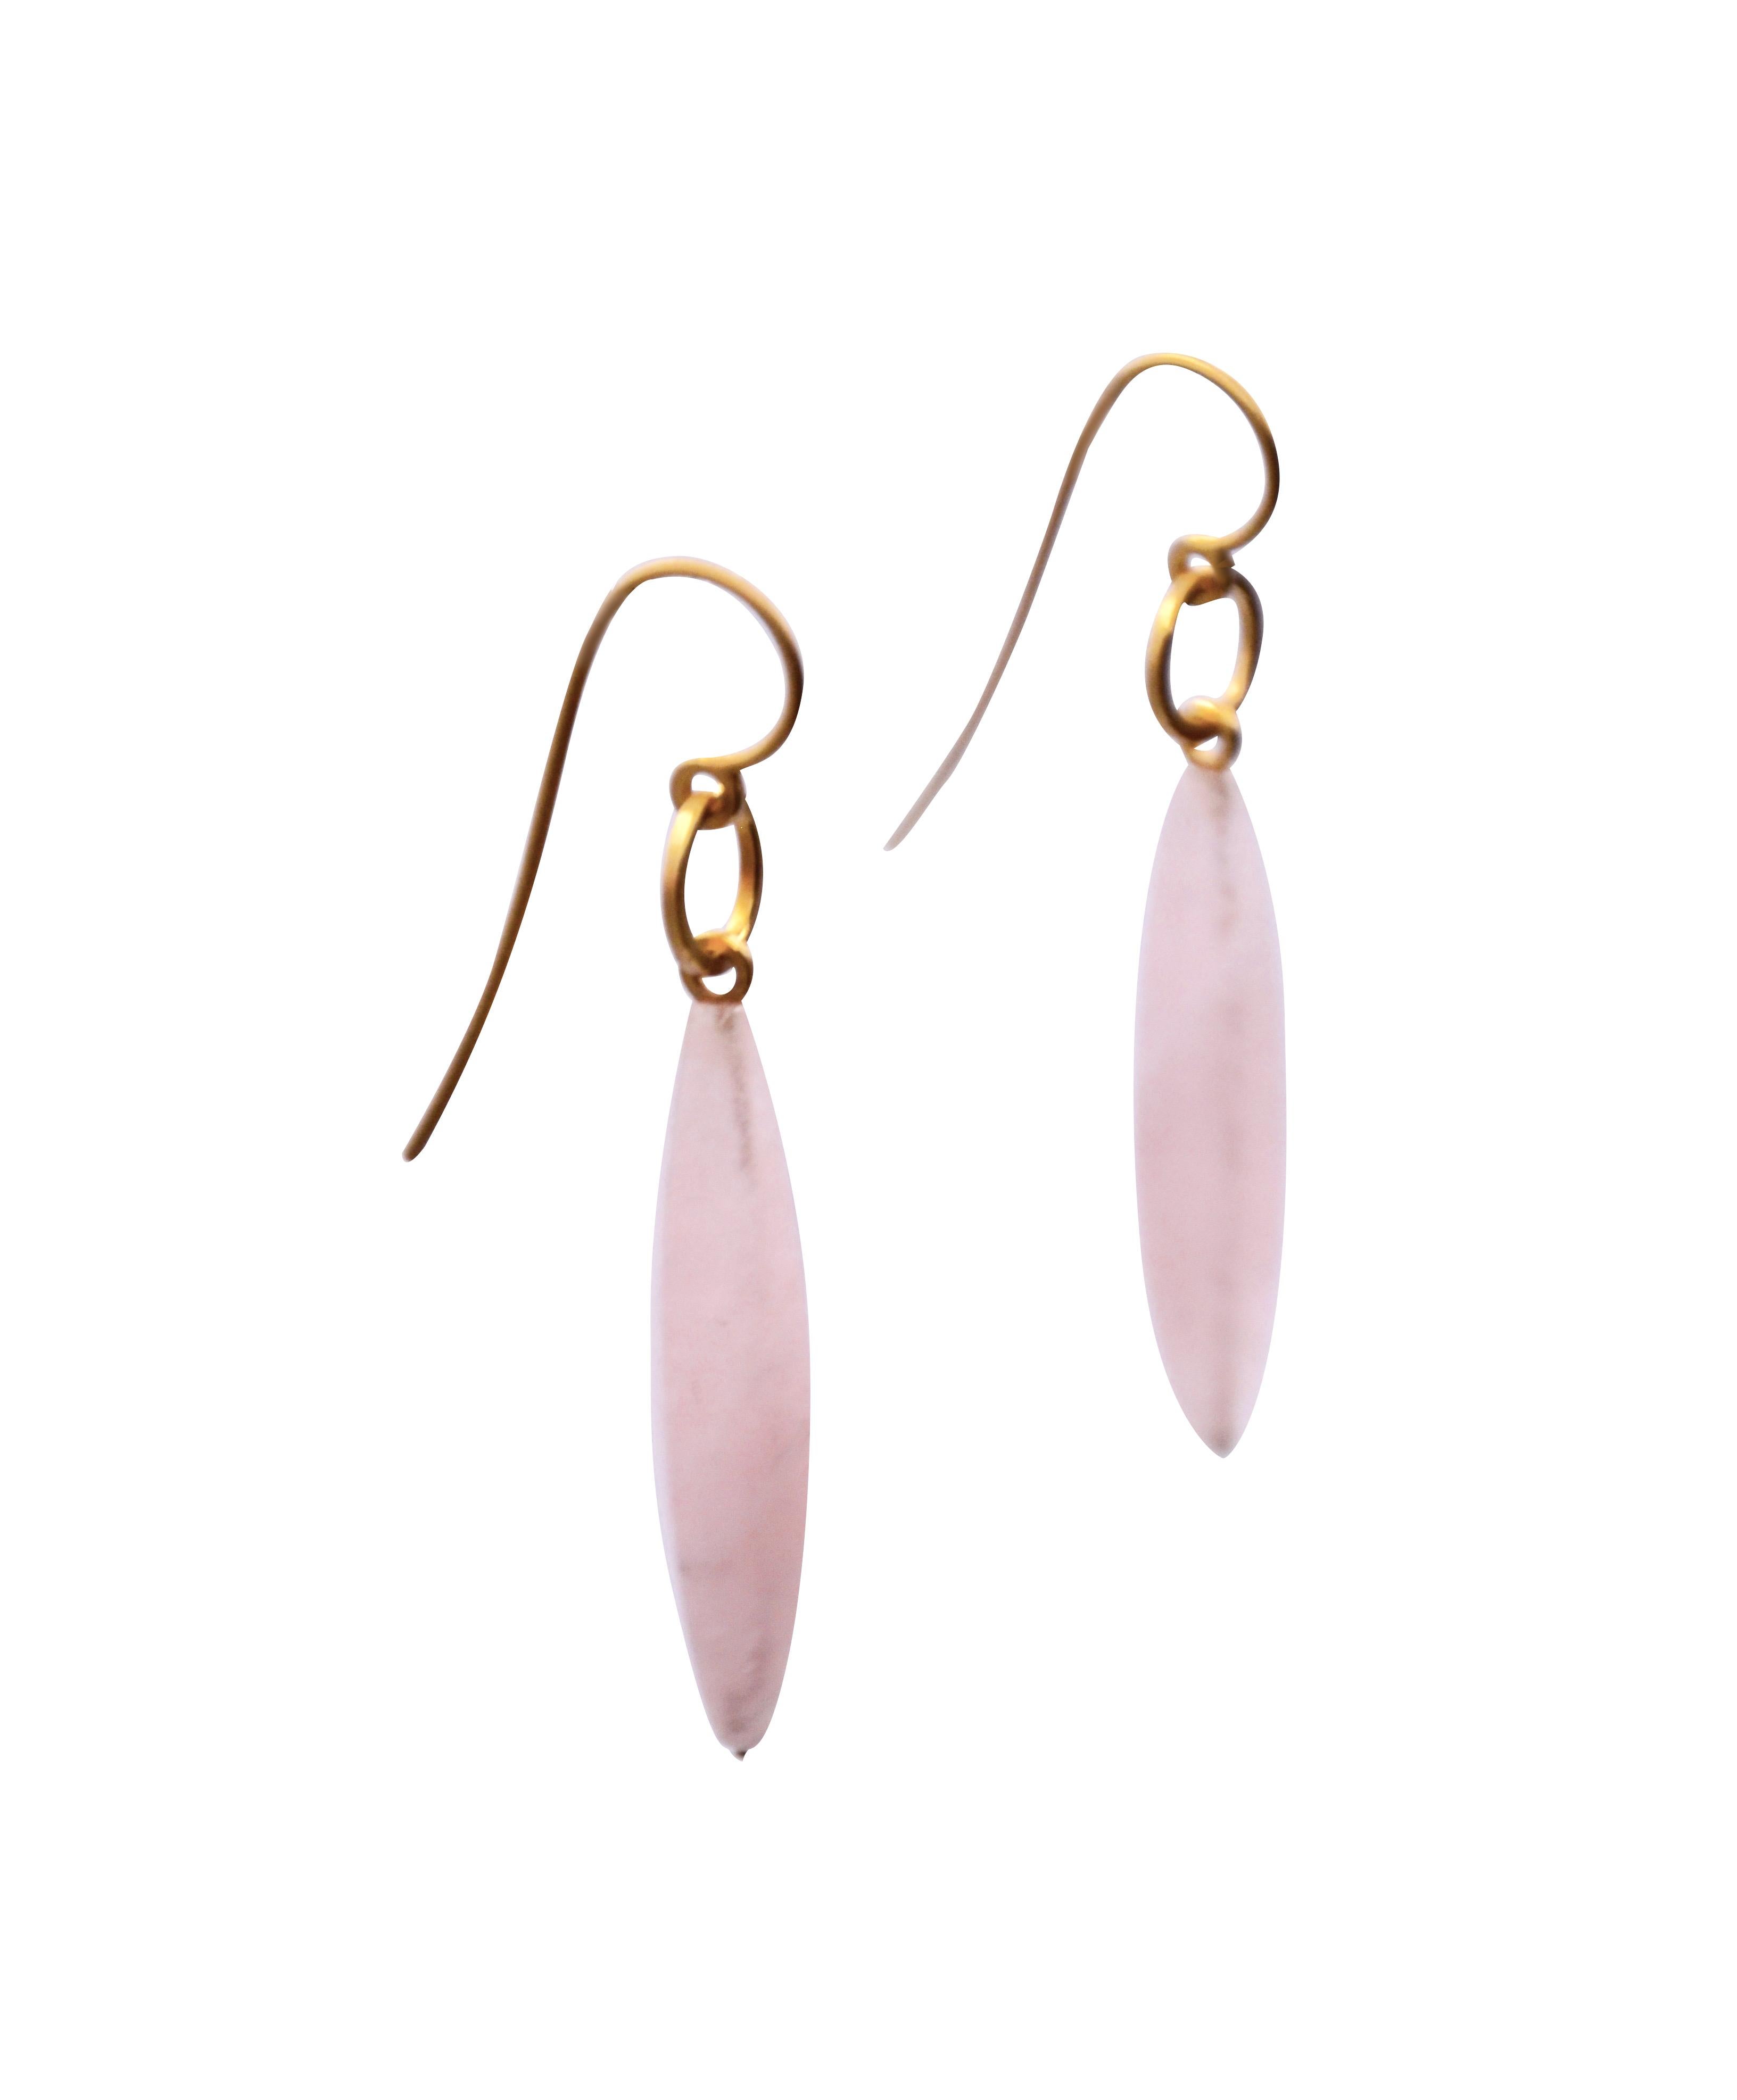 Contemporary 18 karat gold earrings with rose quartz.

A delicate creation by Arno Schneider with 40 Diamonds à 0,80 (tw-vs) set in 18 carat white gold on a top of yellow gold. A combination of 3 precious components that perfectly fit together as an